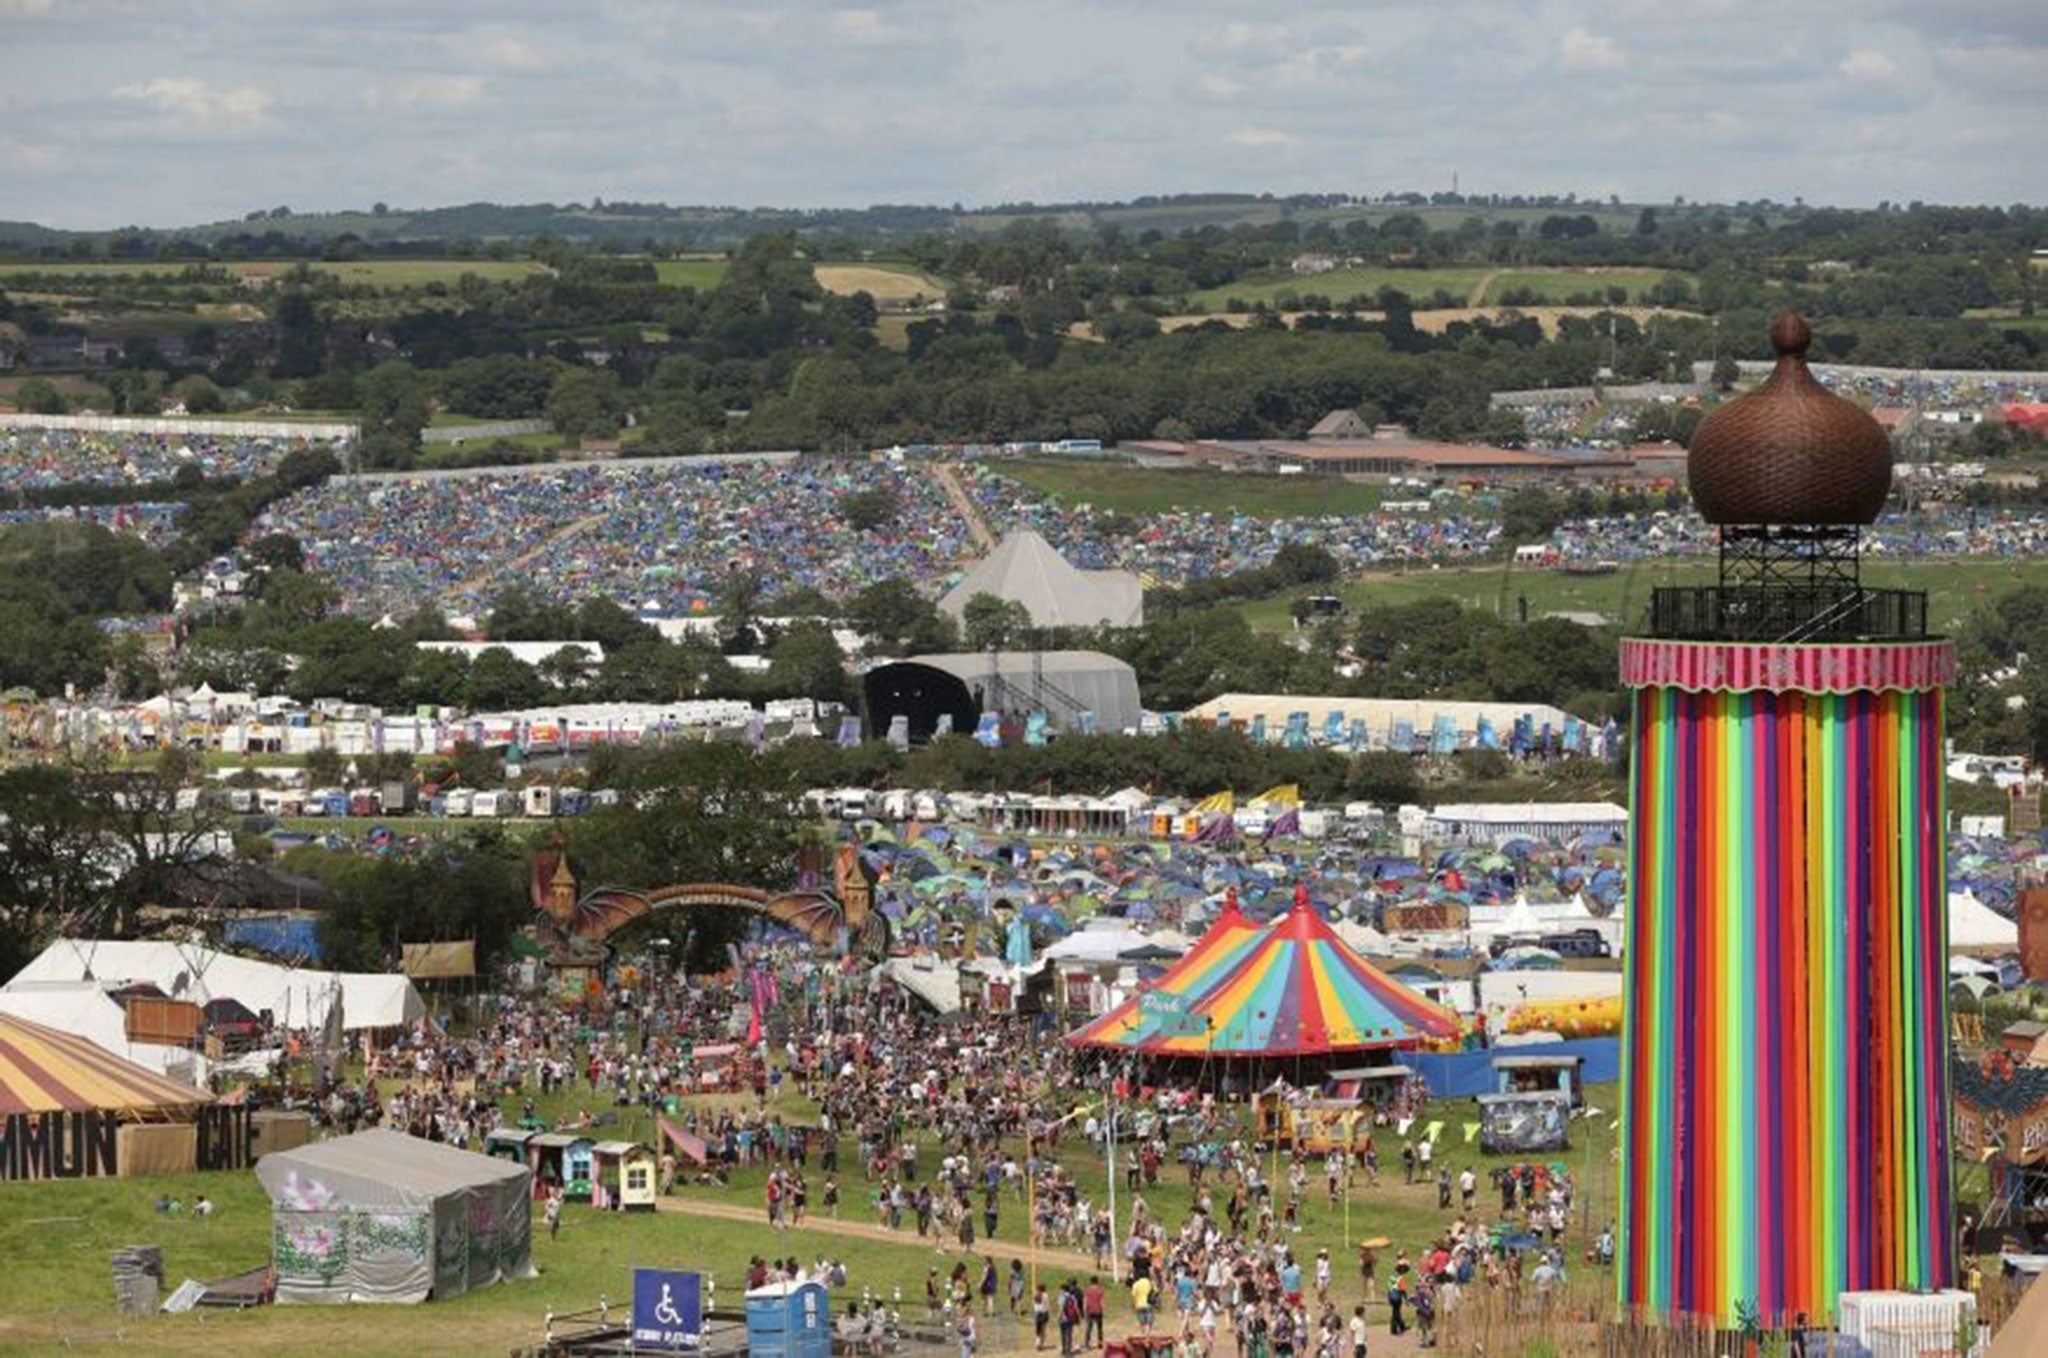 The BBC's coverage of Glastonbury kicks of at 7pm with a special on-site at Worthy Farm edition of The One Show